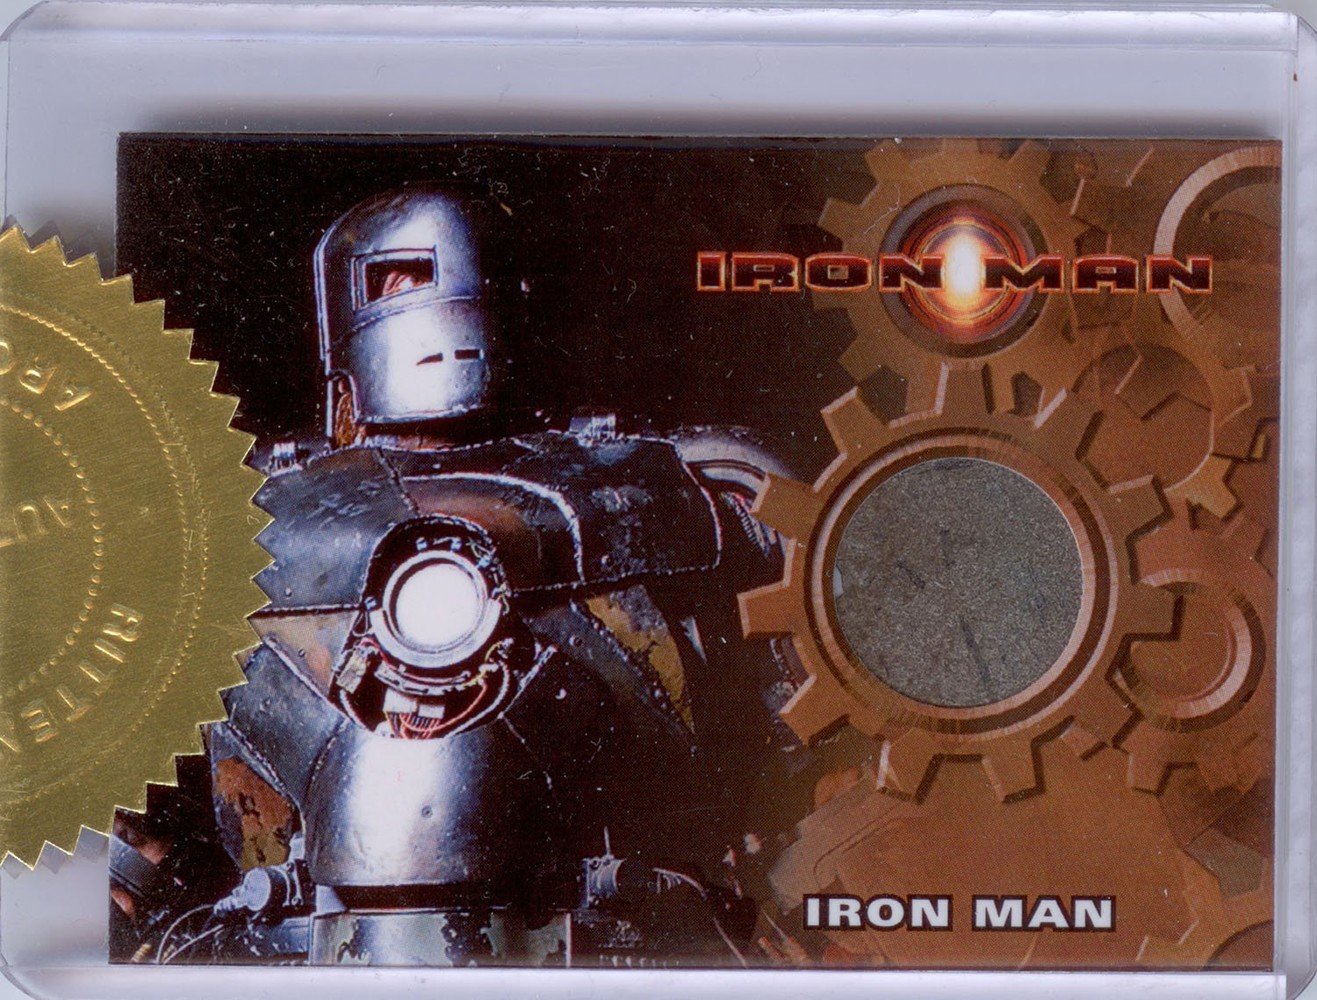 Rittenhouse Archives Iron Man Movie Cards Prop Card  Mark I Armor